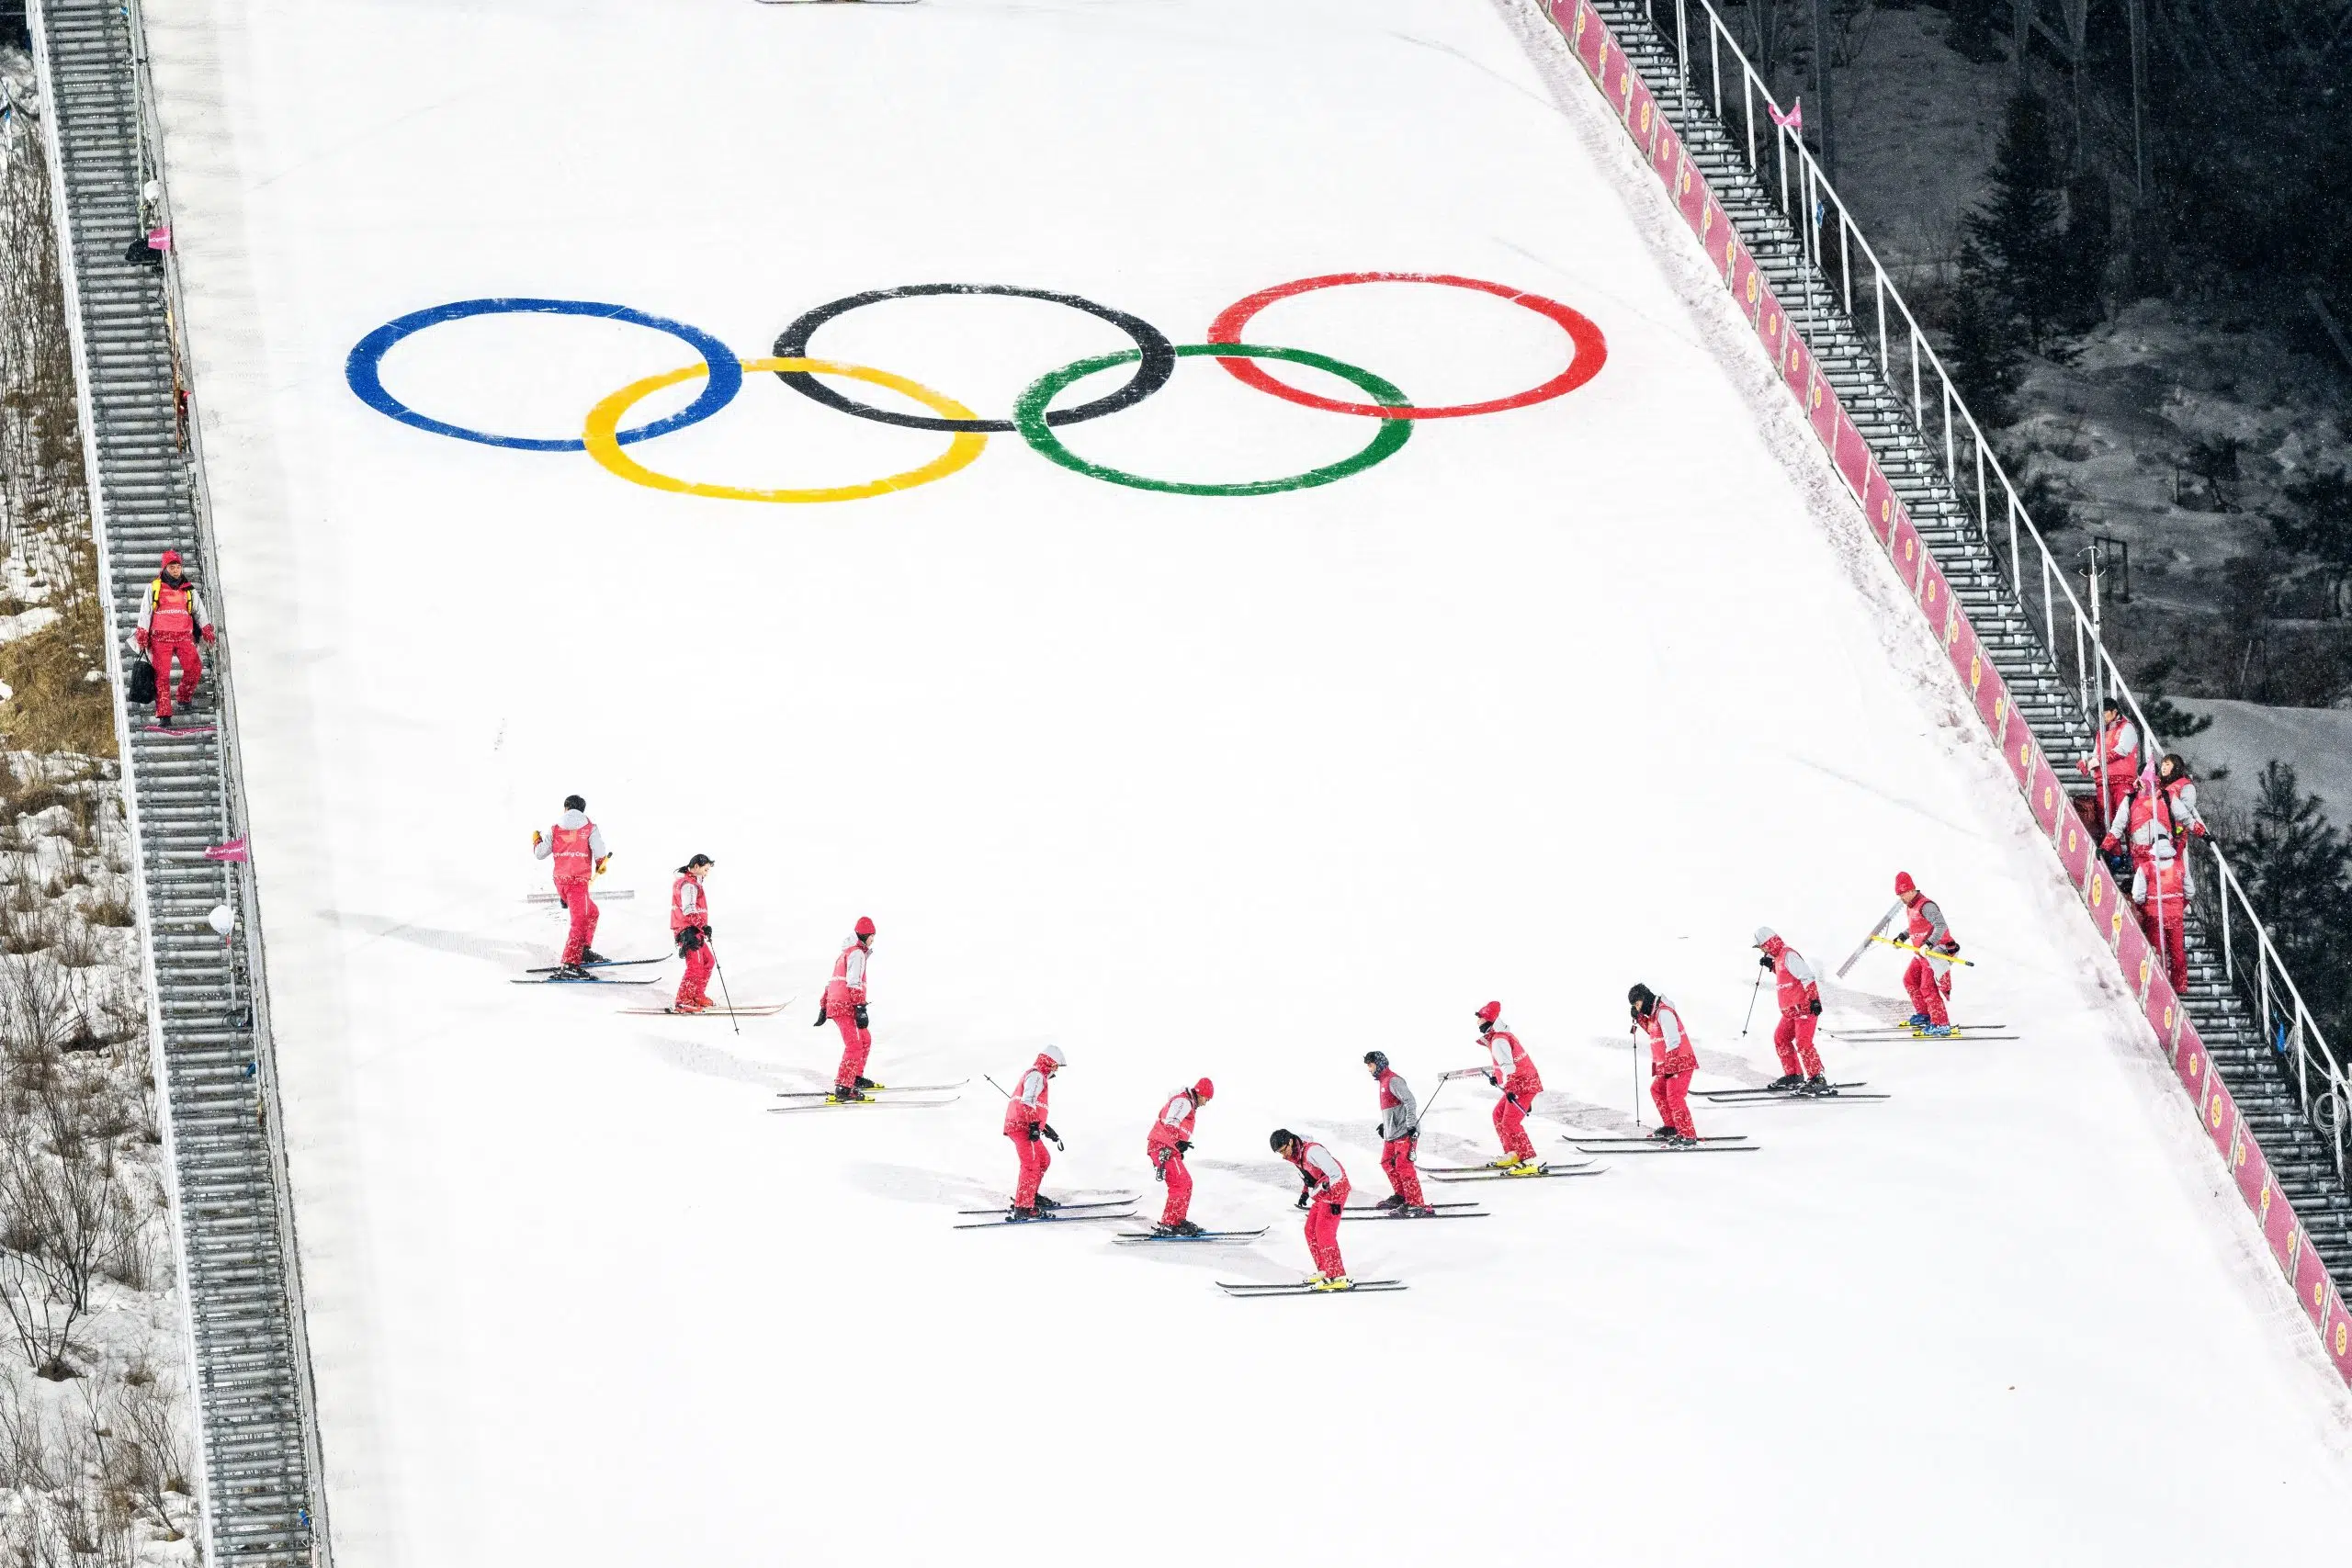 2022 Winter Olympics in Beijing are officially underway!